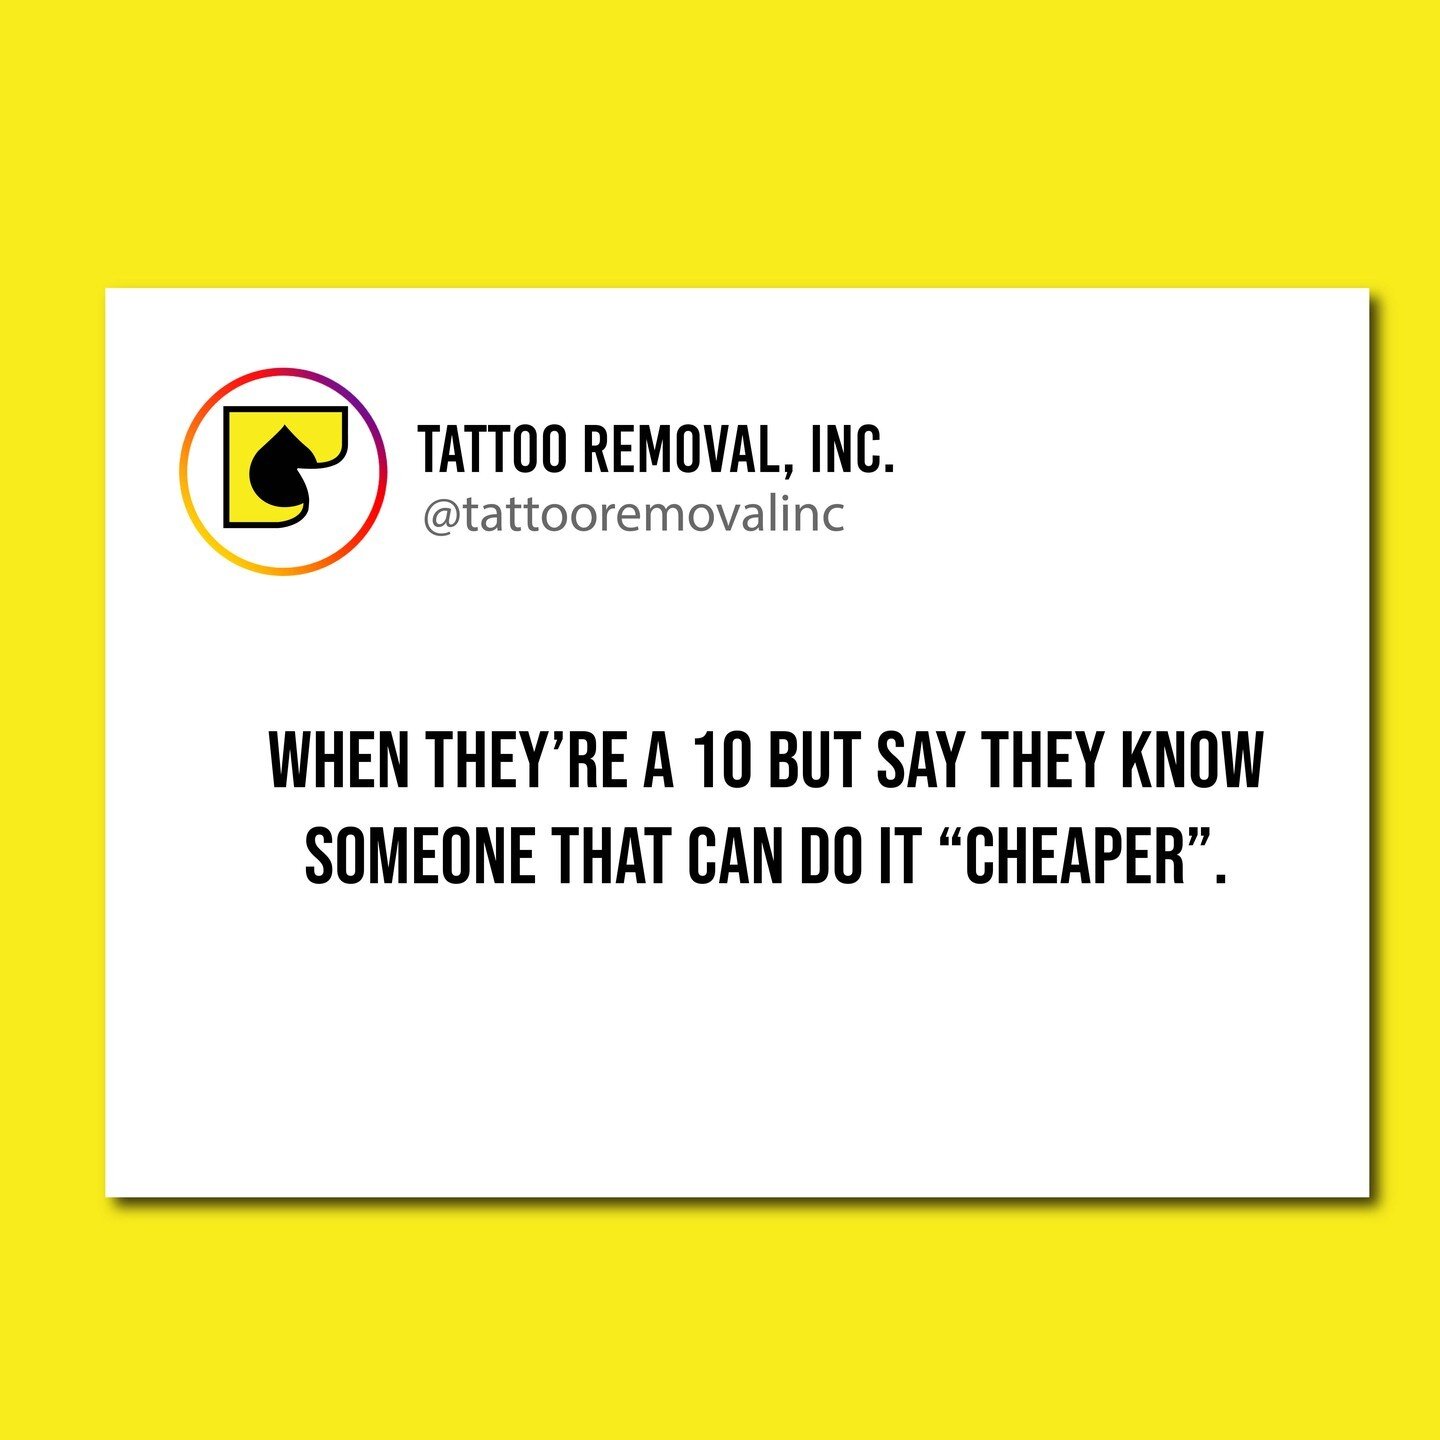 If you know a 10, come send them our way we can help show them what a 10 looks like.

#AfterCareRoutine #BeforeAftterResults #LaserRemovalInkTreatment #MakeUpTattooRemoval #CoverUpTattooRemoval #DifferentResultsDifferentIndividual #Eraser #QuoteOfThe